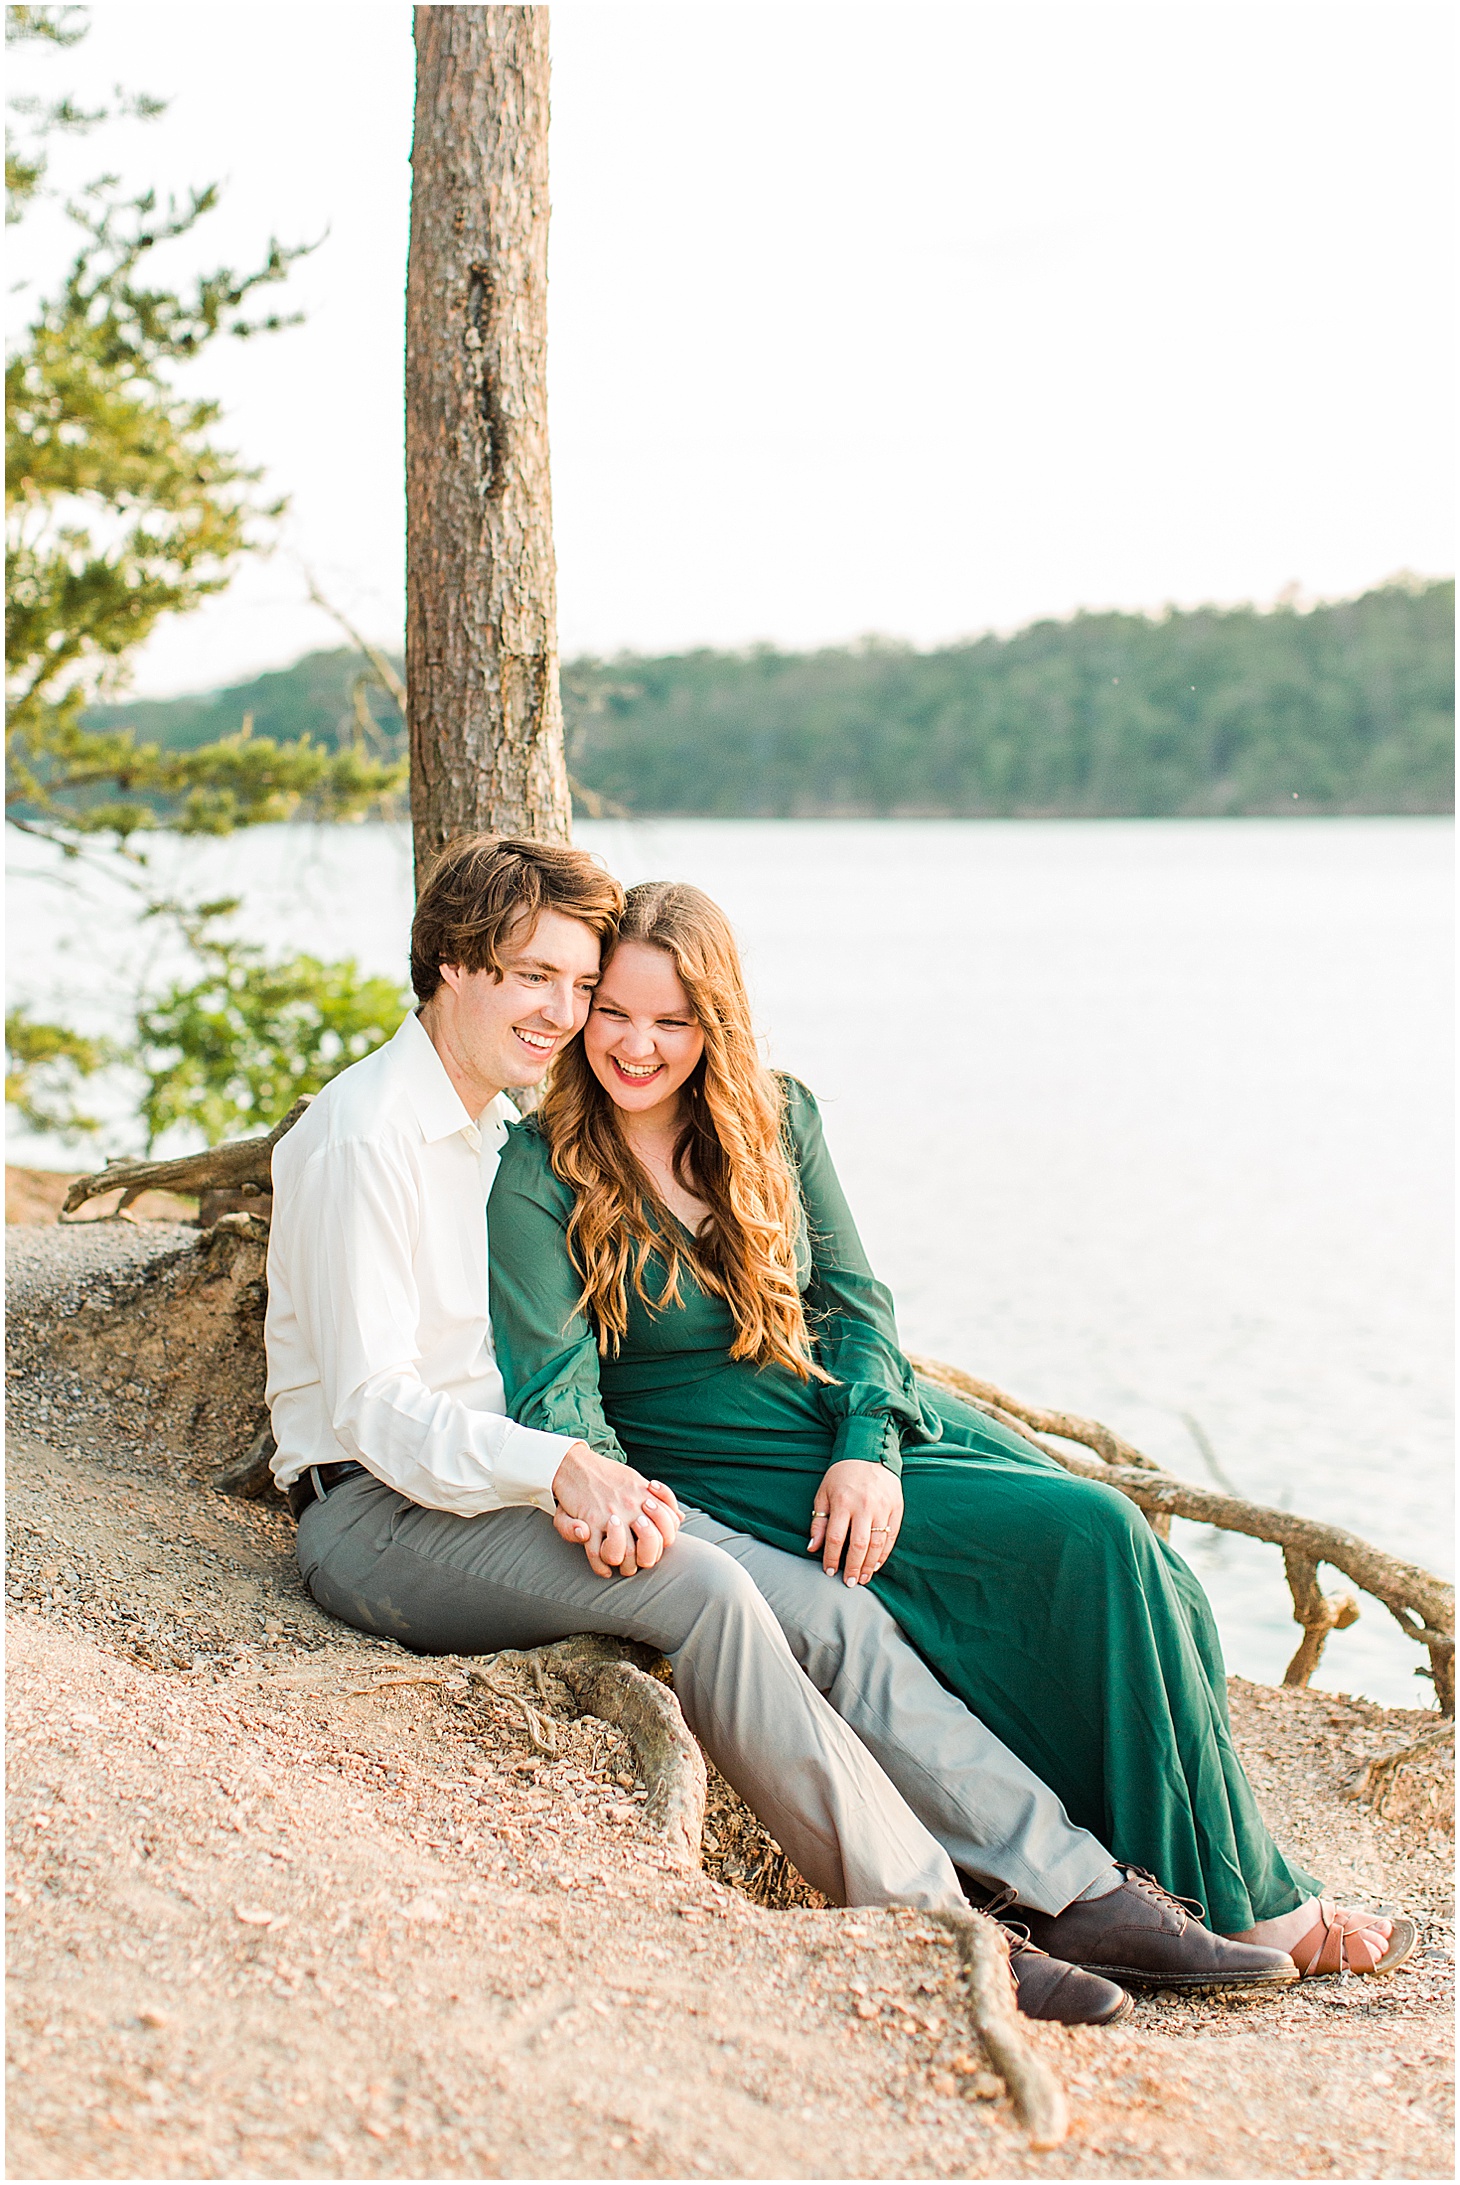 carvinscoveengagementsession_roanokeengagementsession_carvinscove_virginiawedding_virginiaweddingphotographer_vaweddingphotographer_photo_0048.jpg